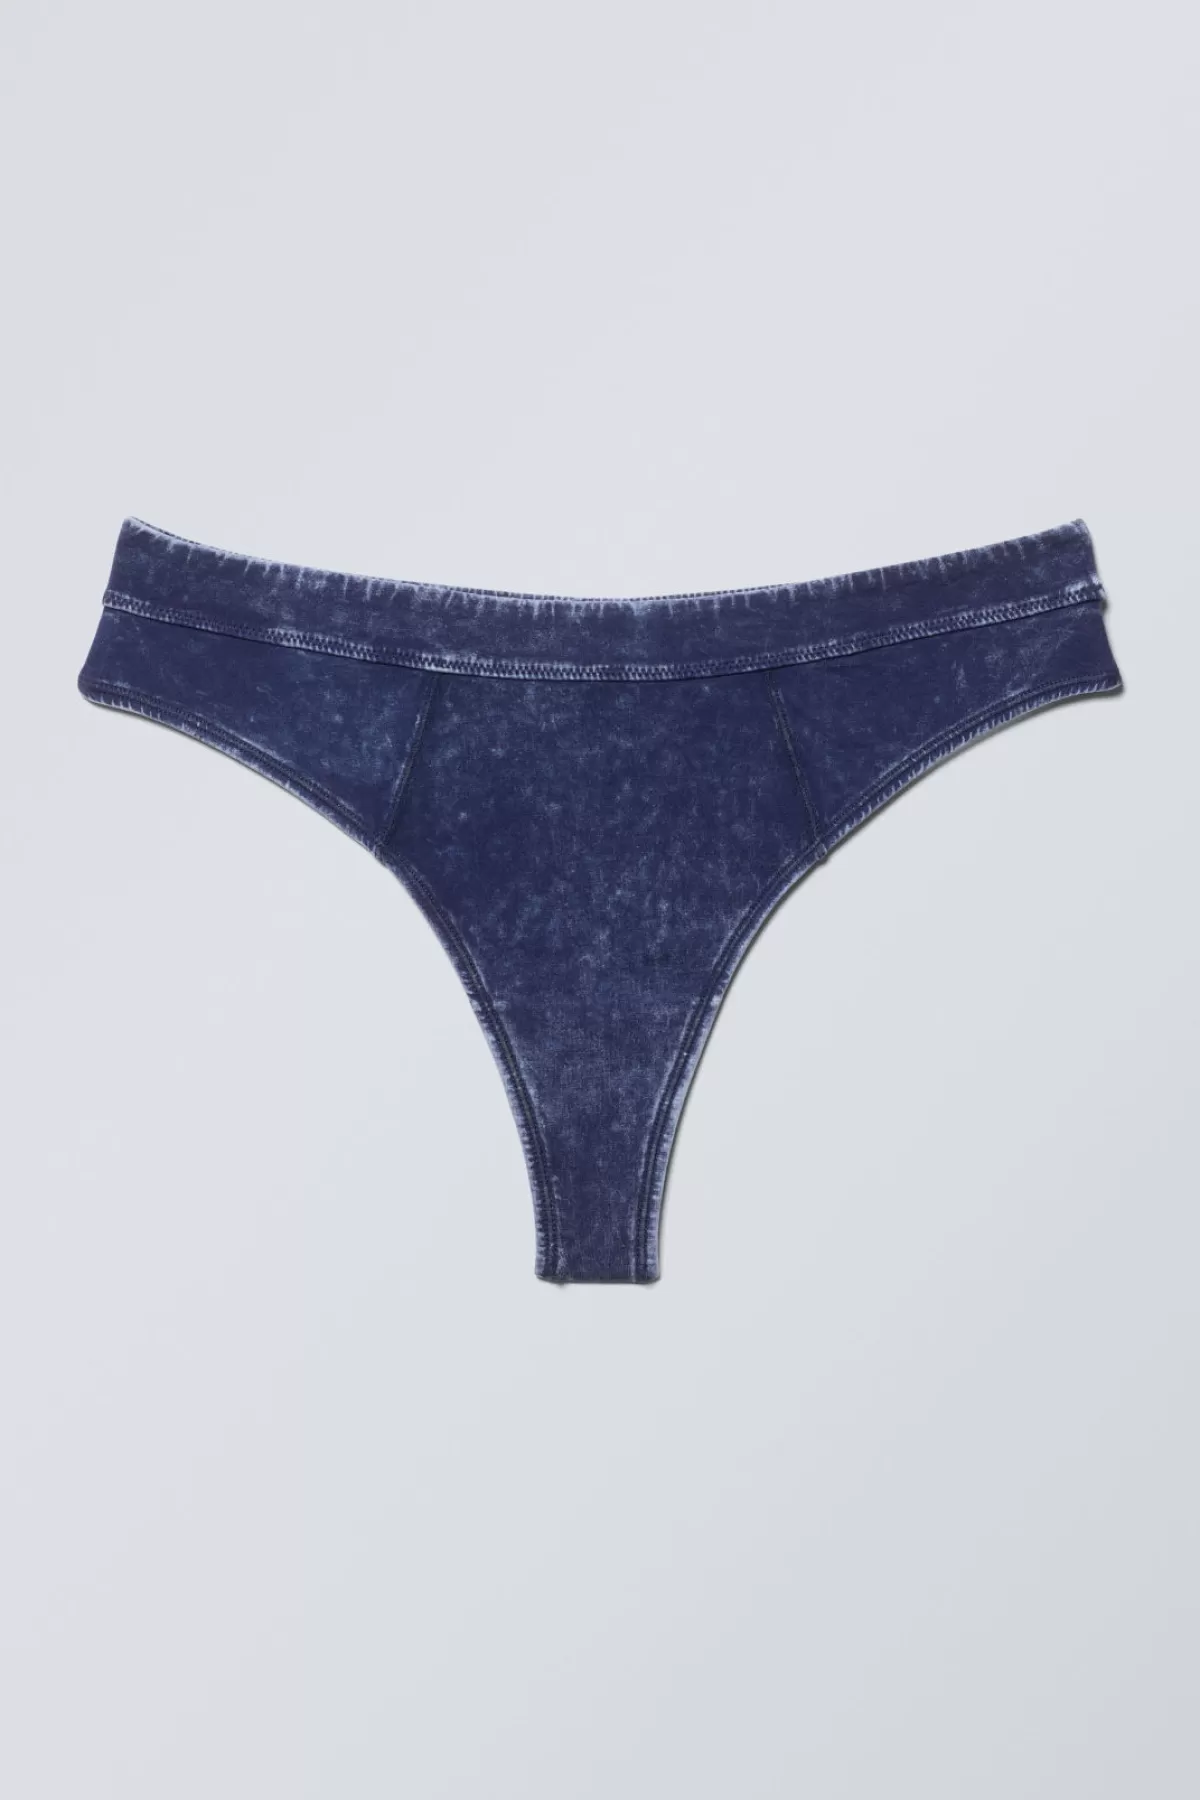 Weekday Miley Washed Cotton Thong Bleach Washed Blue Hot